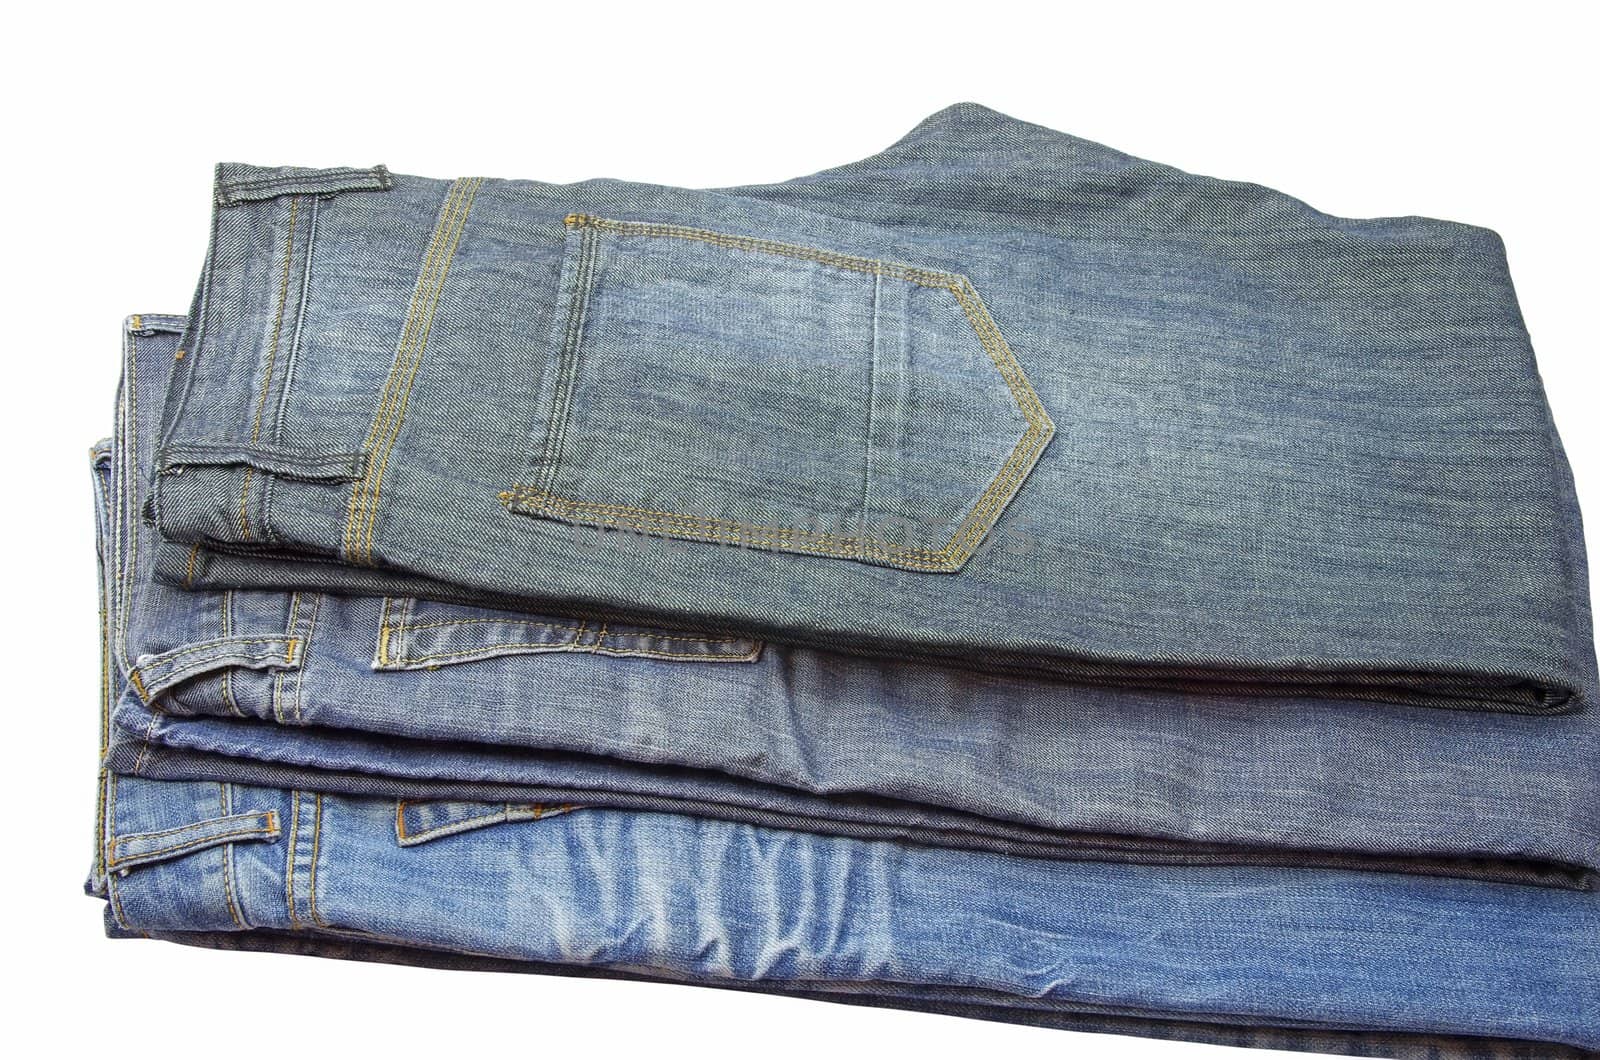 Folded jeans by savcoco